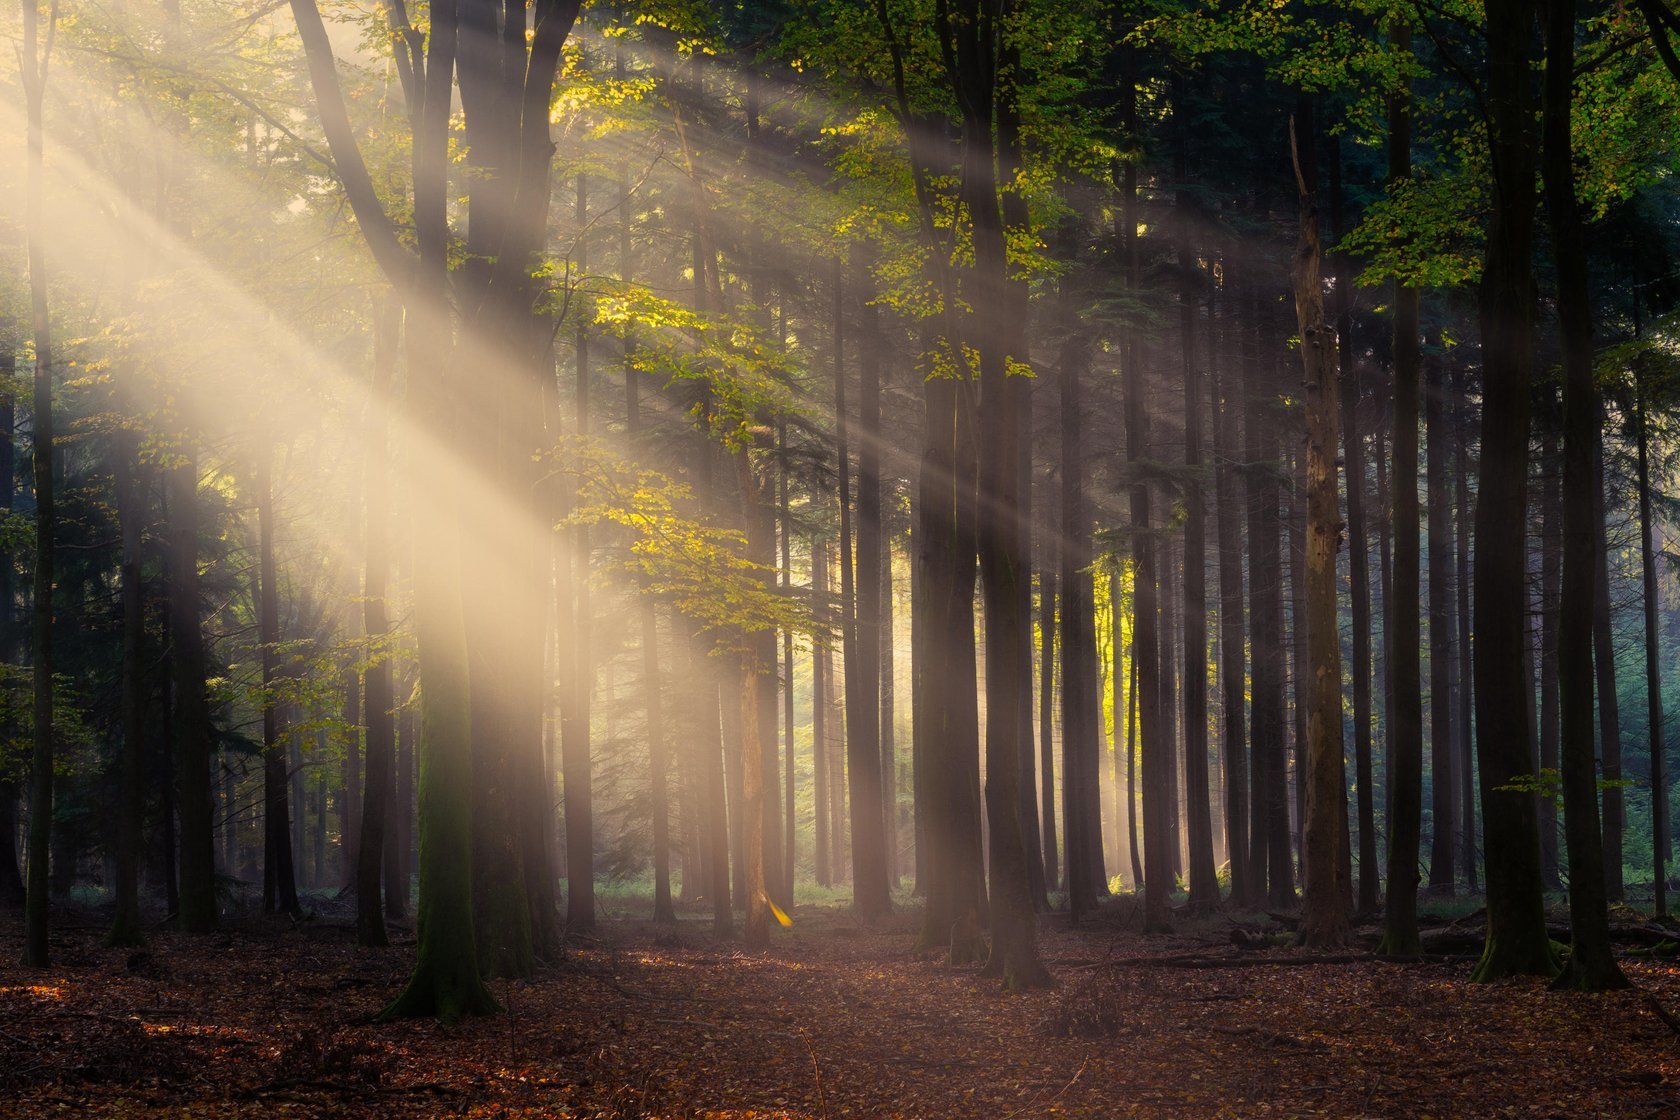 Magical Forests by Albert Dros. How to shoot and edit forest images | Skylum Blog(3)